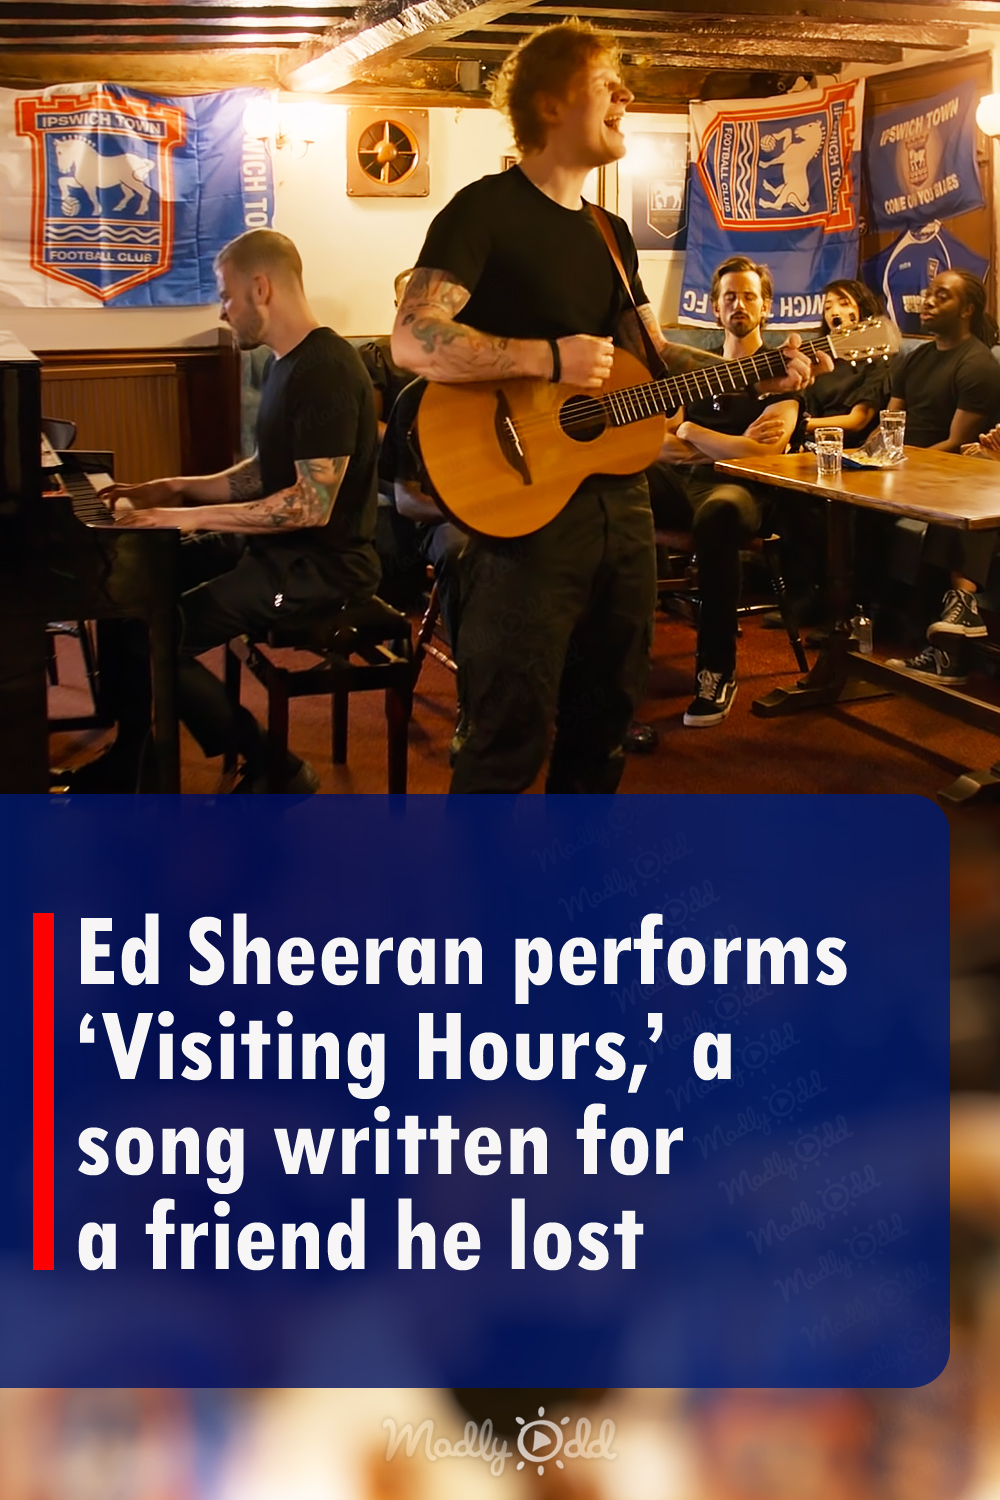 Ed Sheeran performs ‘Visiting Hours,’ a song written for a friend he lost